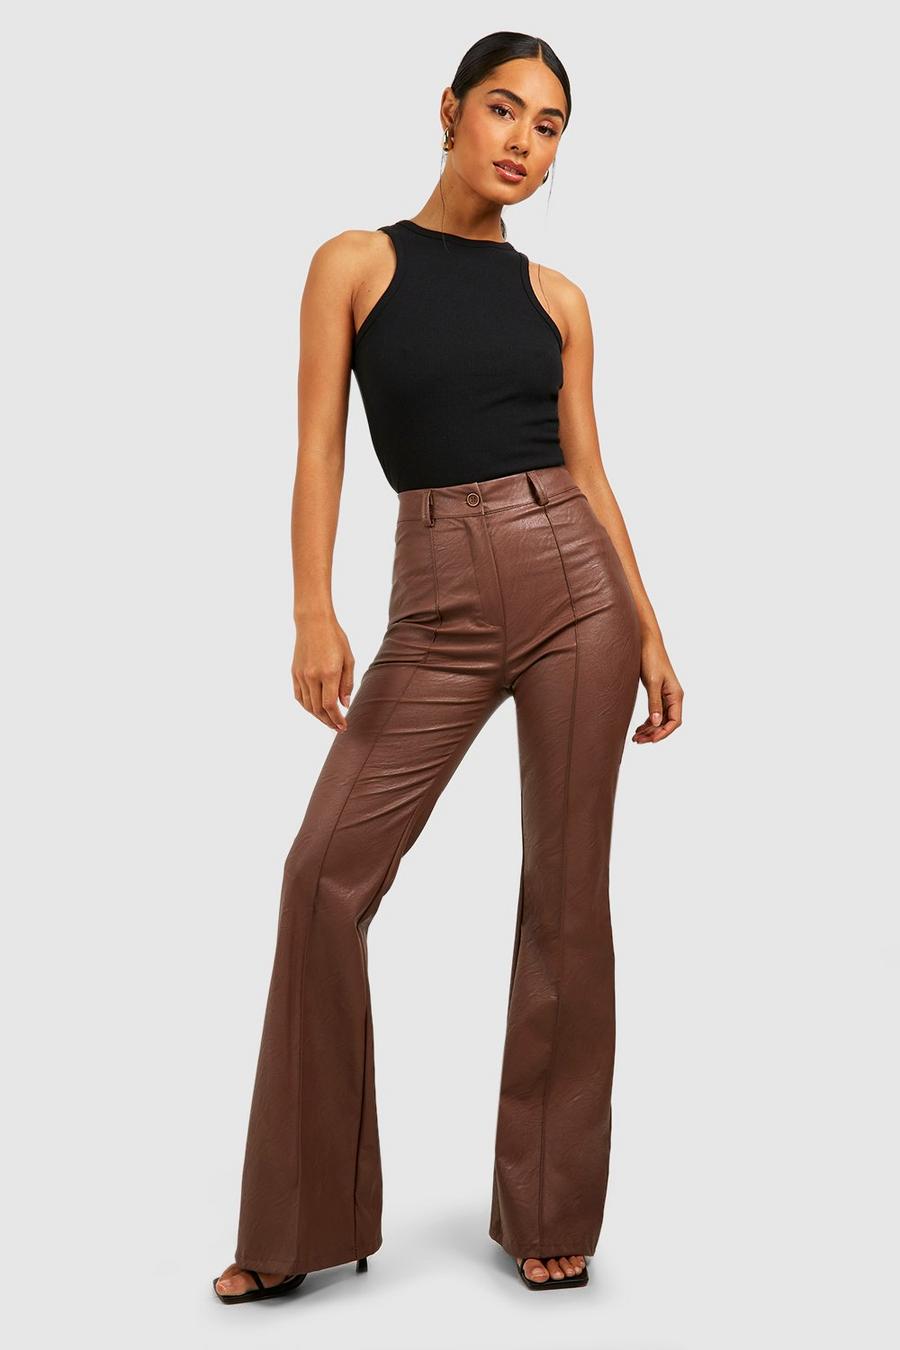 Chocolate Leather Look High Waisted Seam Front Flared Pants